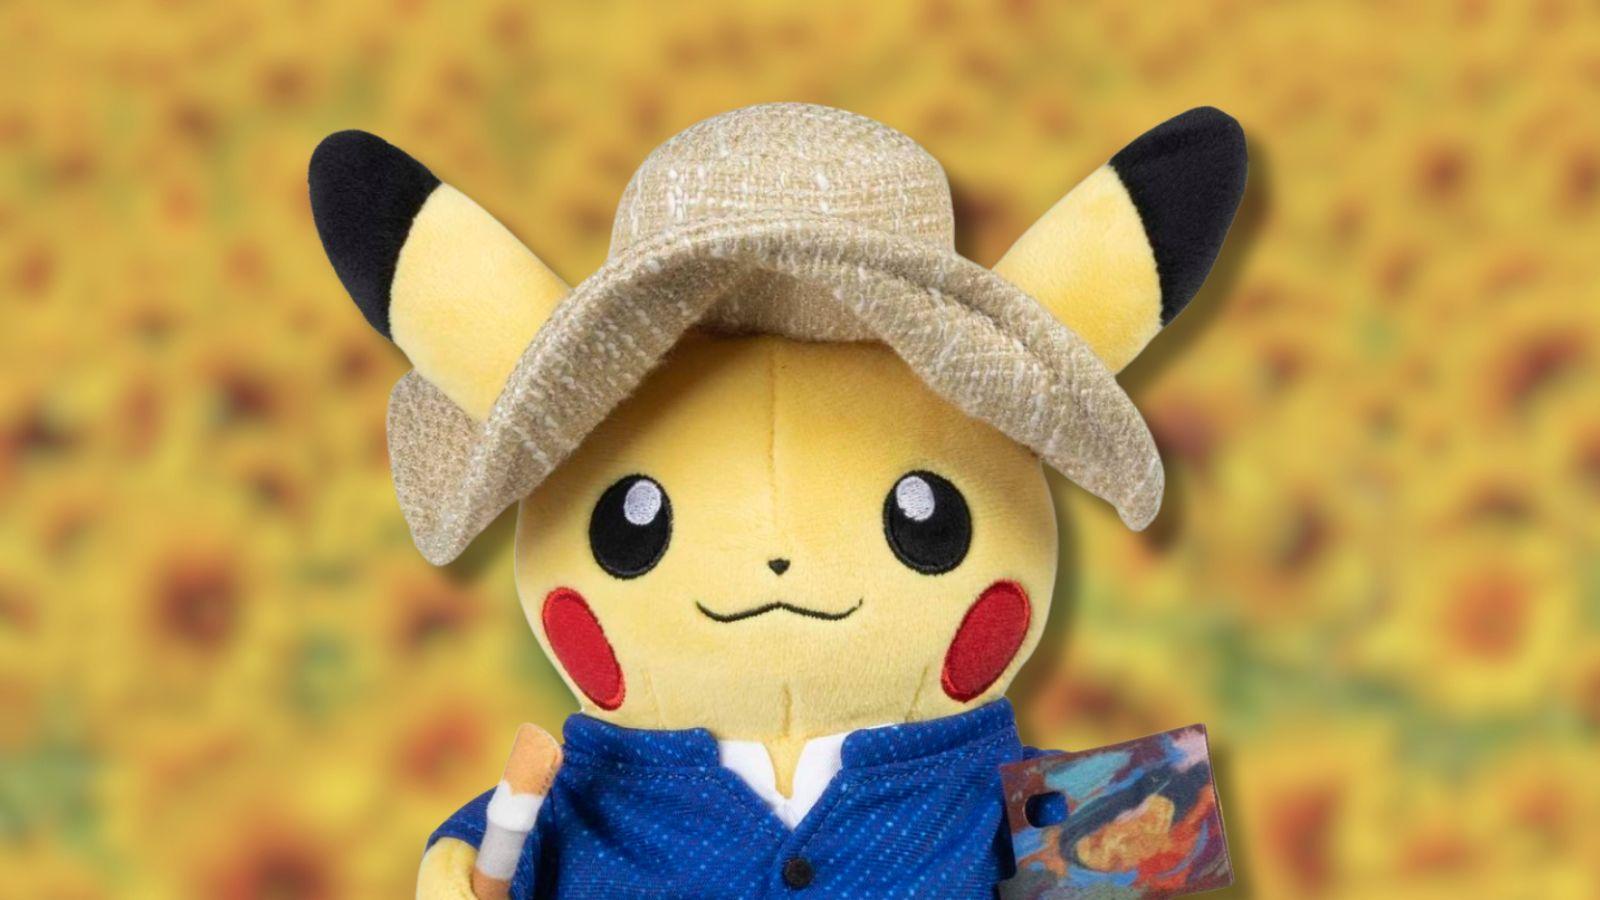 Pikachu Van Gogh plushie with sunflowers in the background.